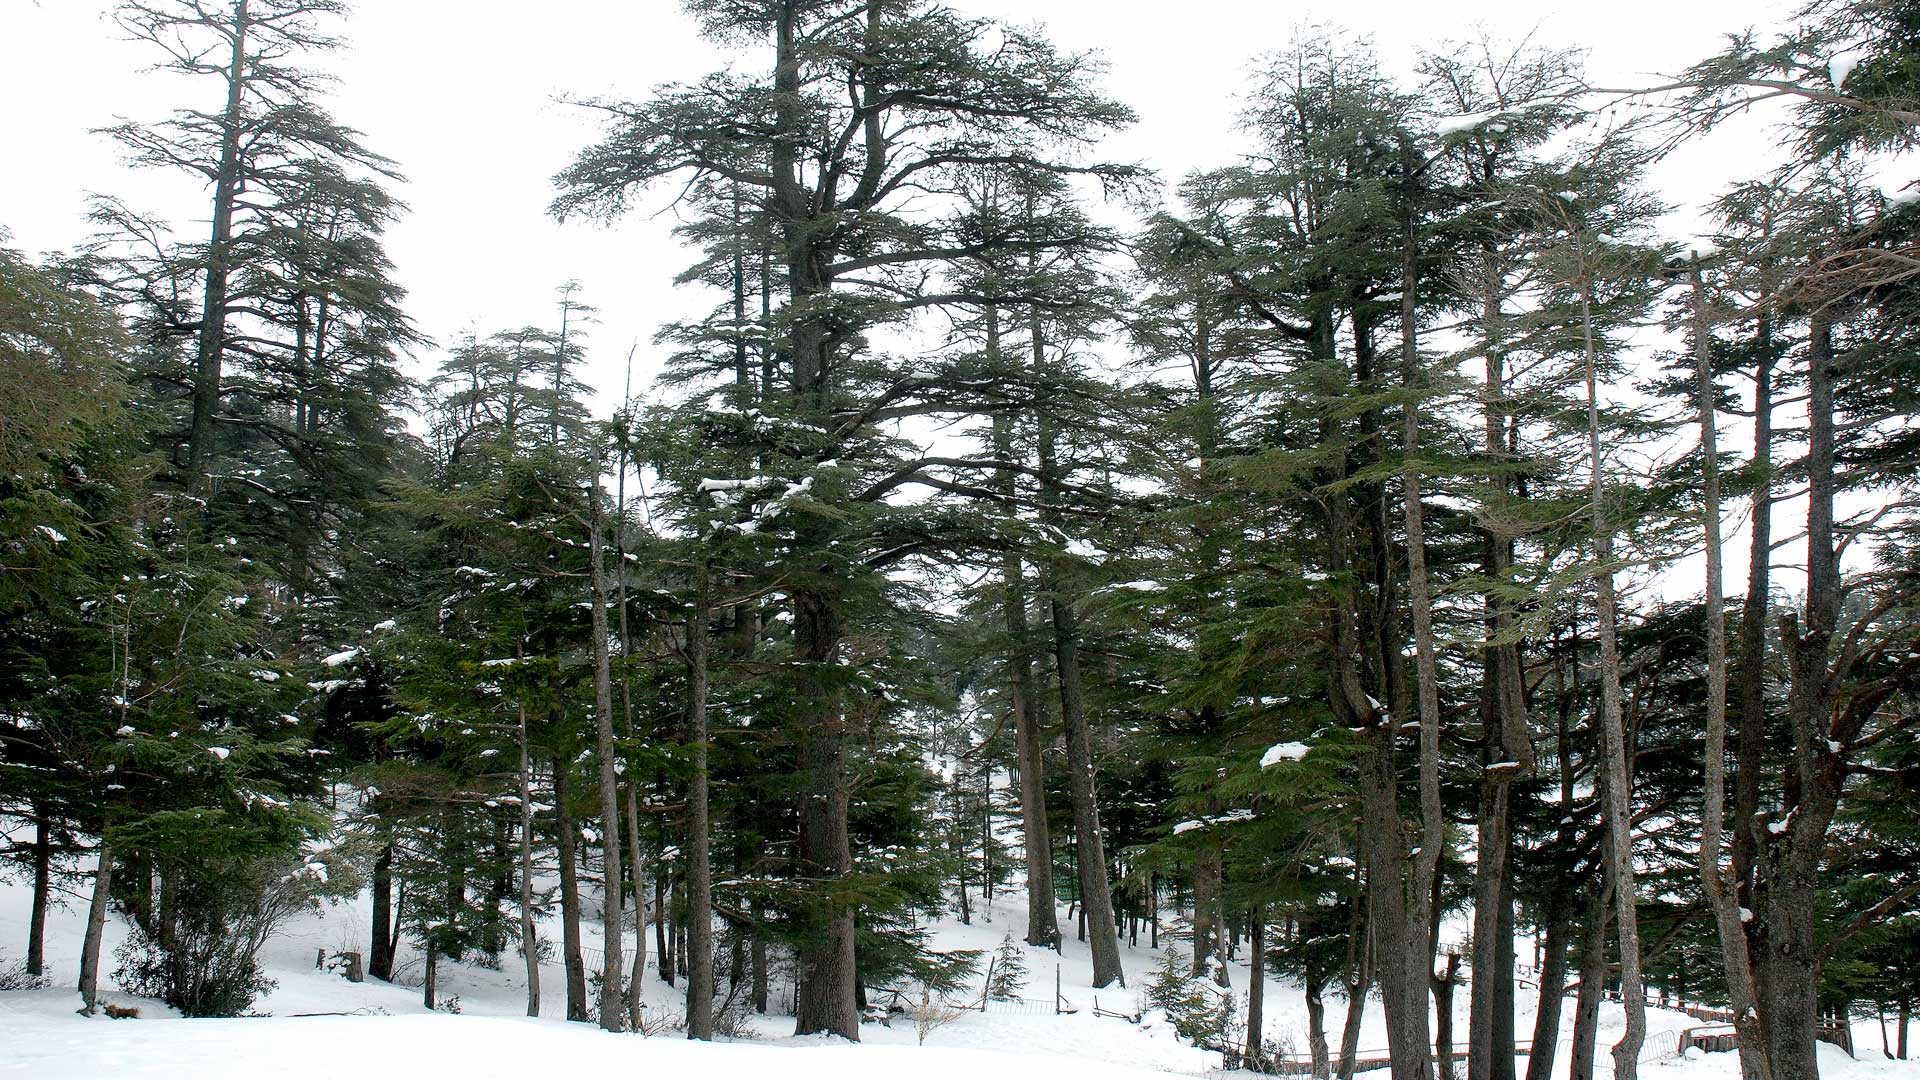 Cedar forest in the Atlas Mountains, Ifrane